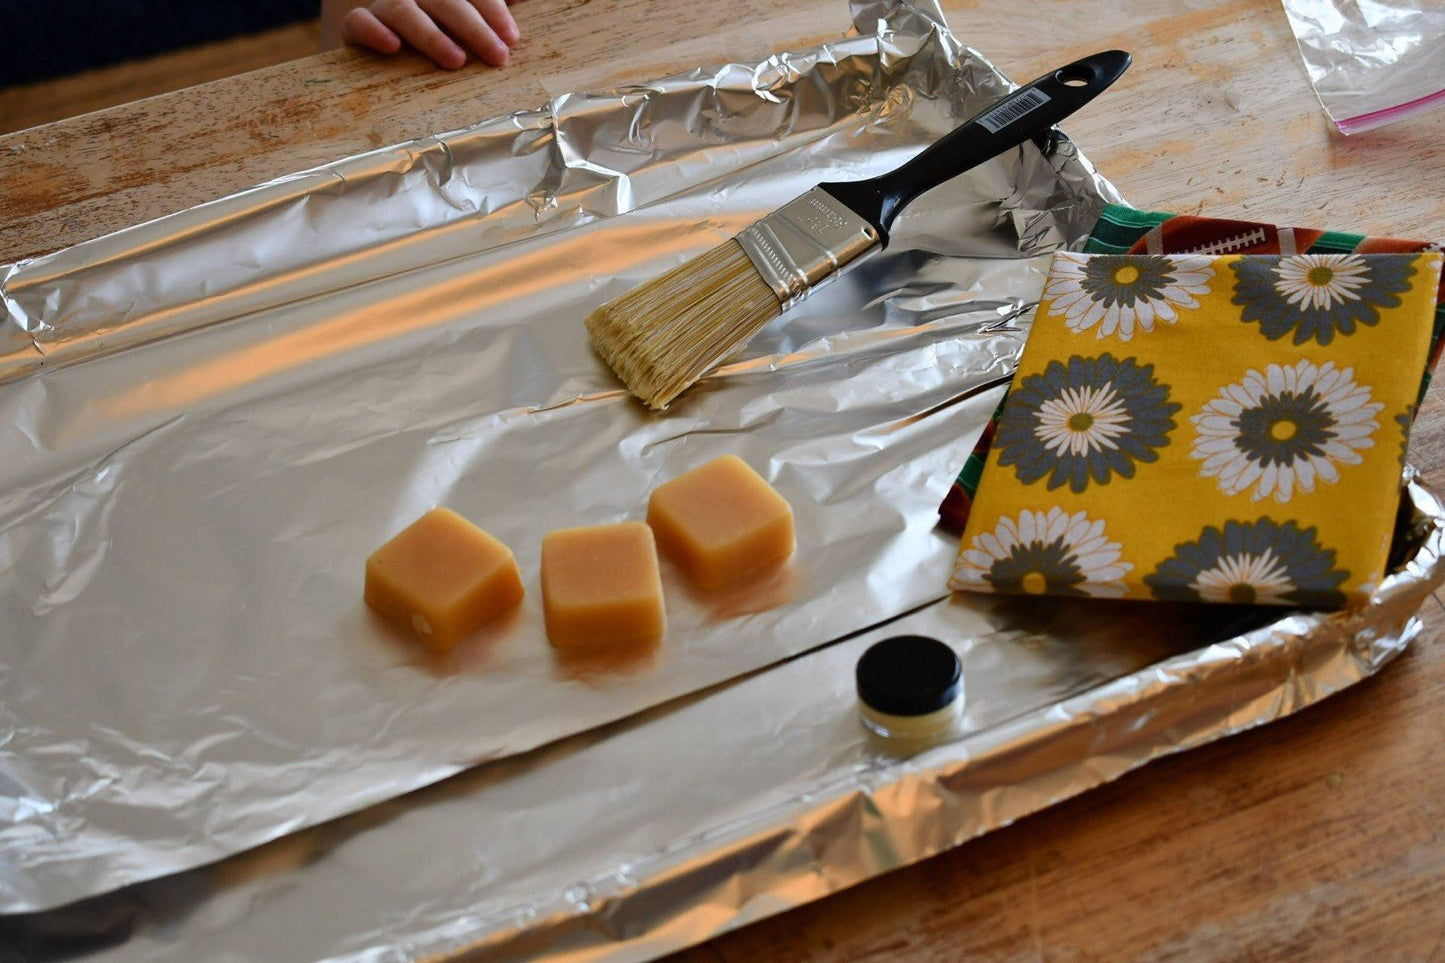 Beeswax Wraps Making Class Learning + Fun Together